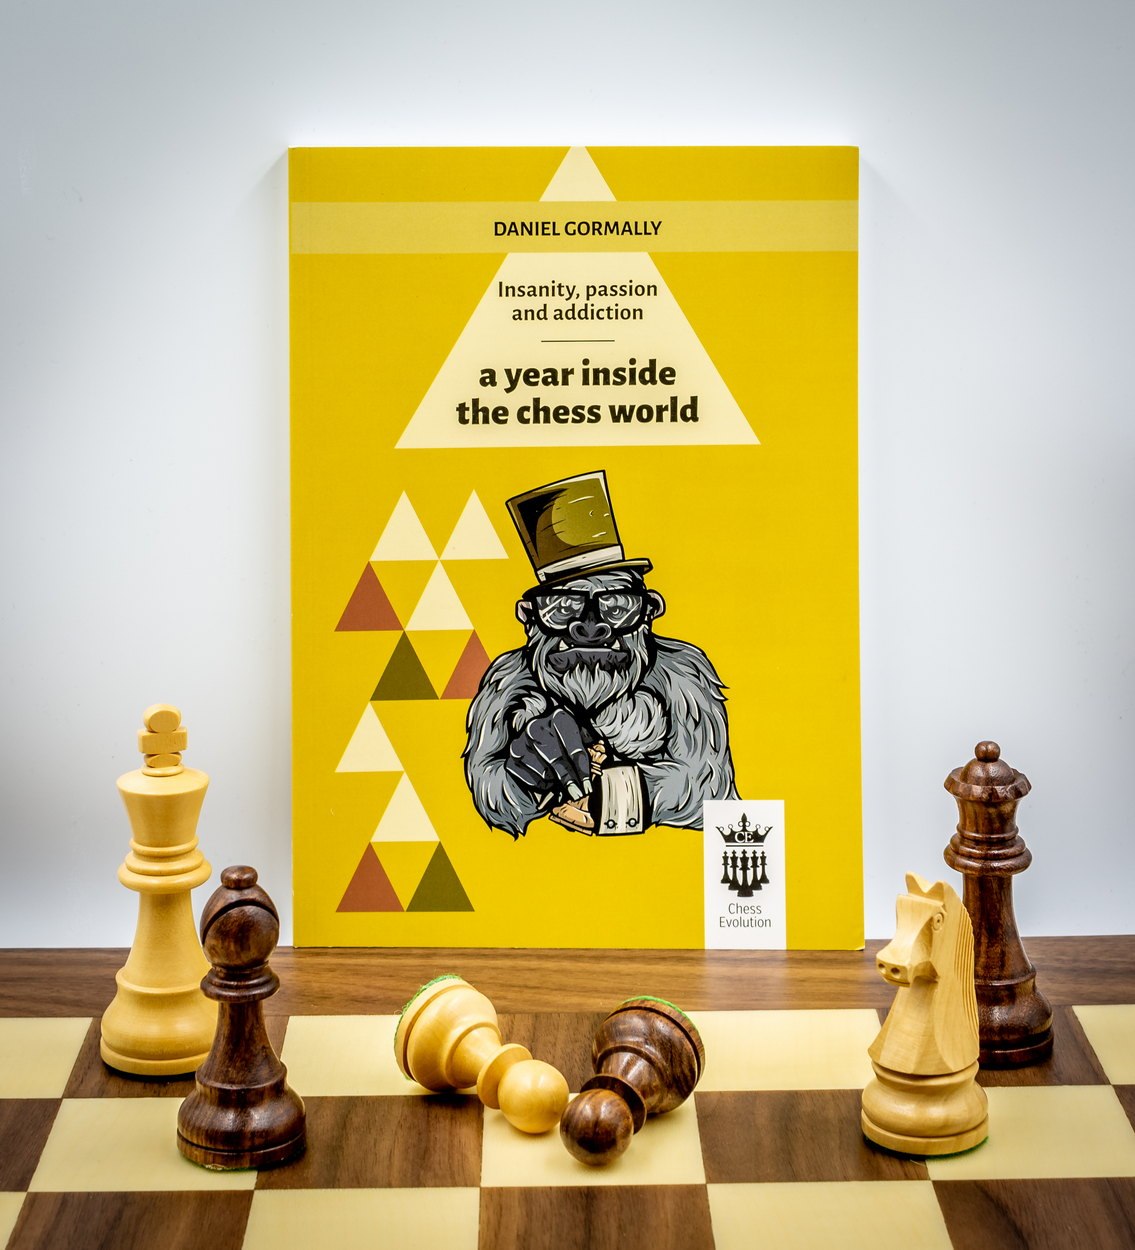 Insanity, passion and addiction a year inside the chess world, 2016